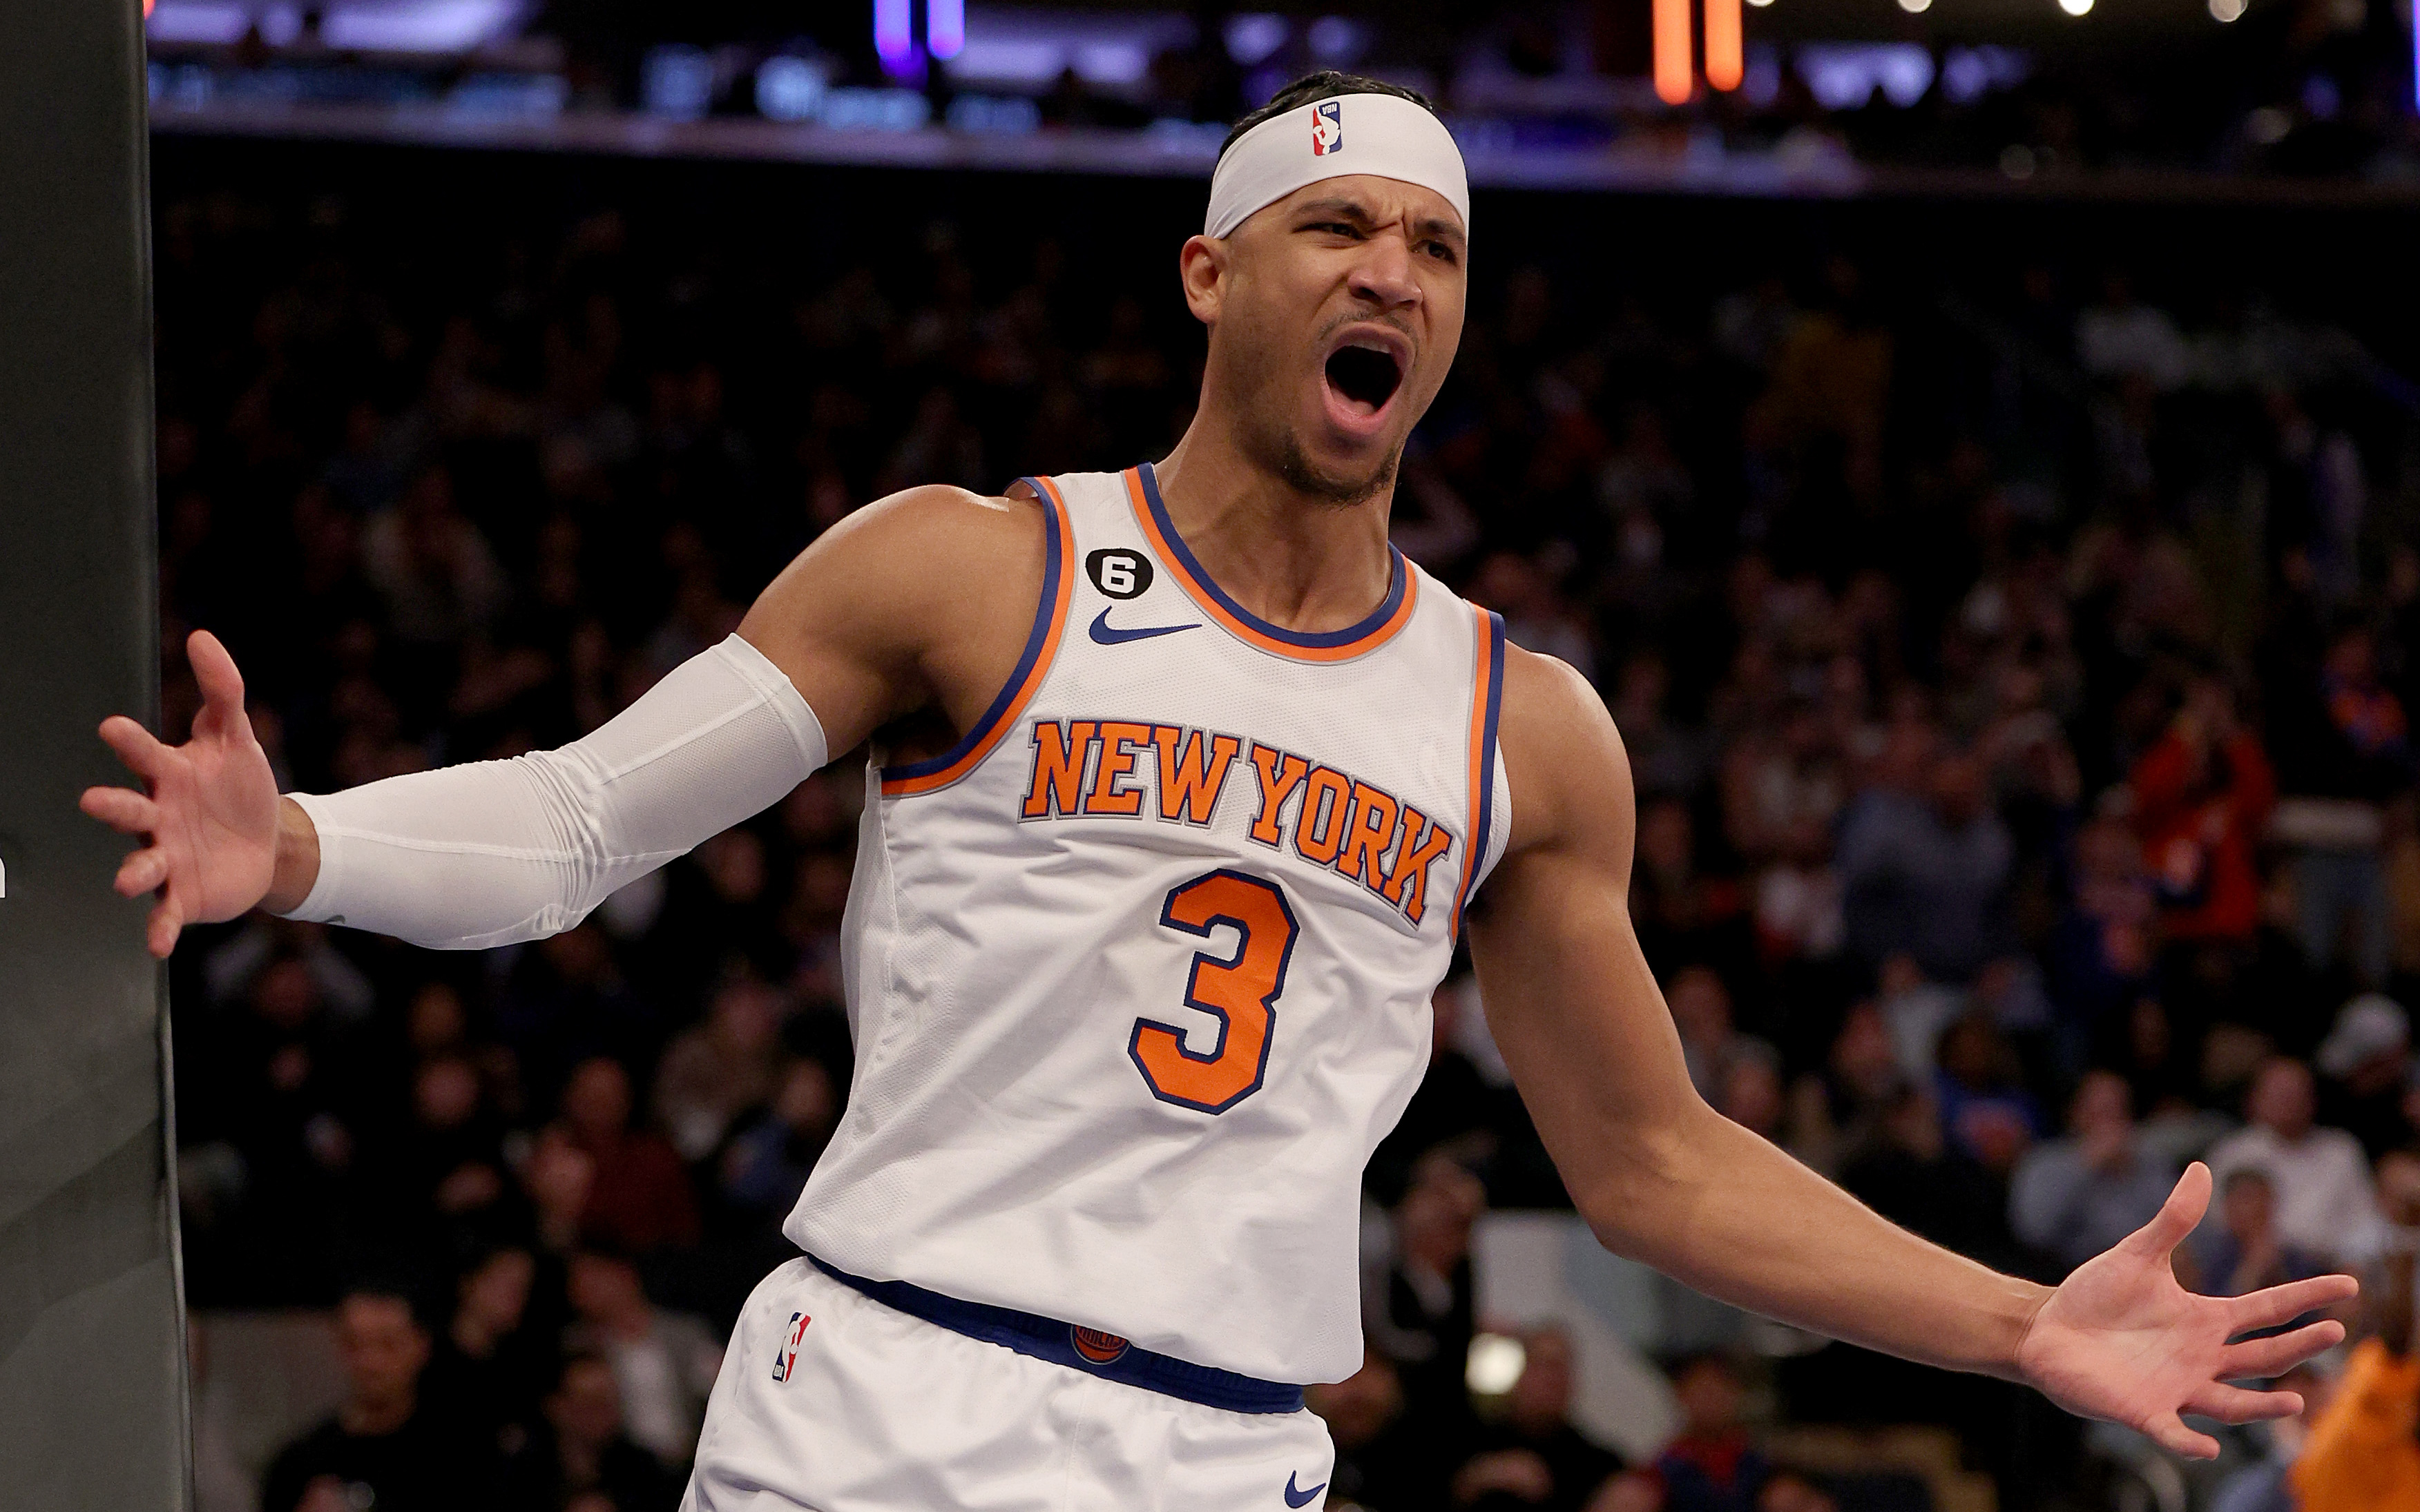 Josh Hart has been a Knick for 10 seconds and he's already shouting “this  is our f—cking city!” at the Nets | This is the Loop | GolfDigest.com